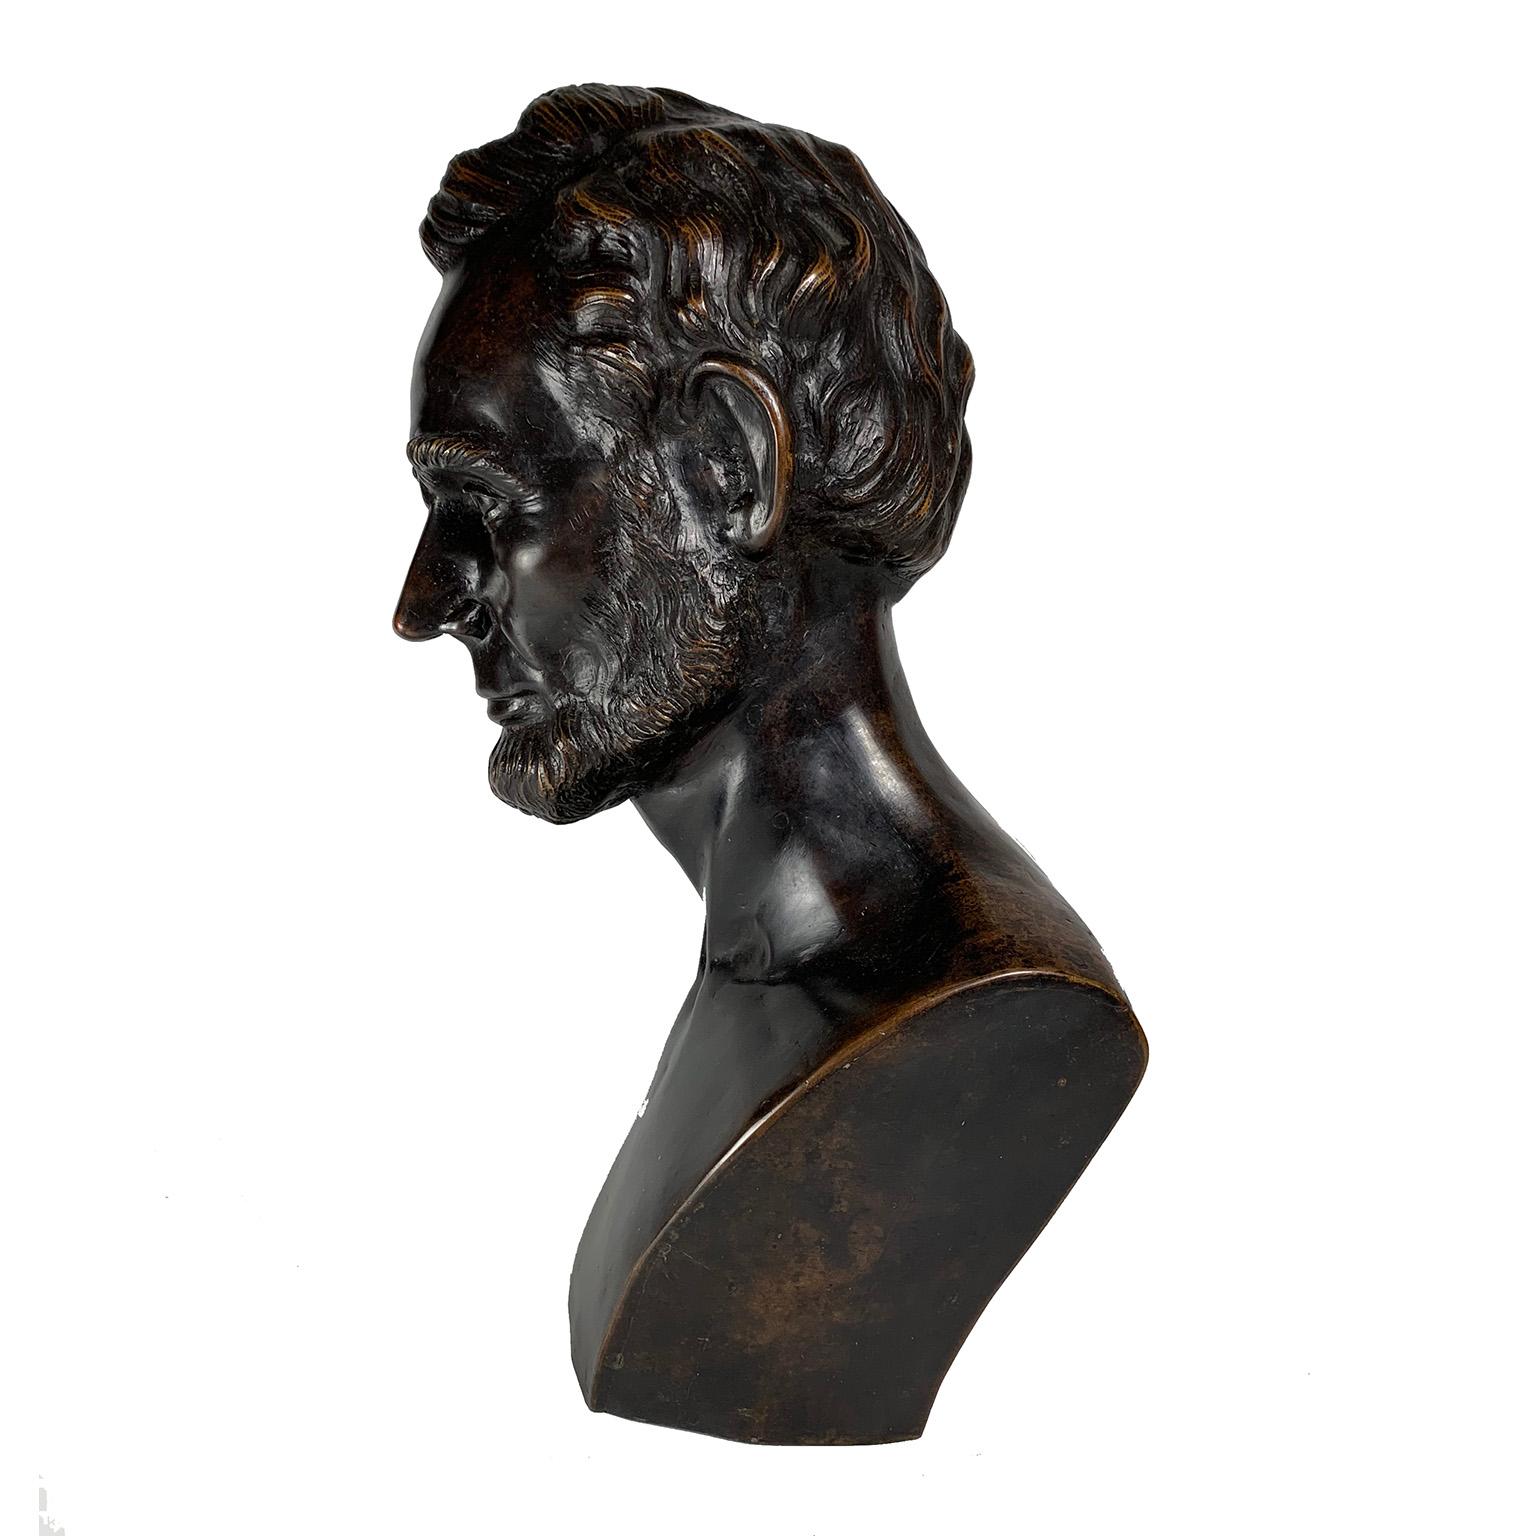 Thomas Dow Jones (American, 1817-1891) bust of Abraham Lincoln, 1864. Bronze with a rich brown patina. Signed, dated and inscribed on back 